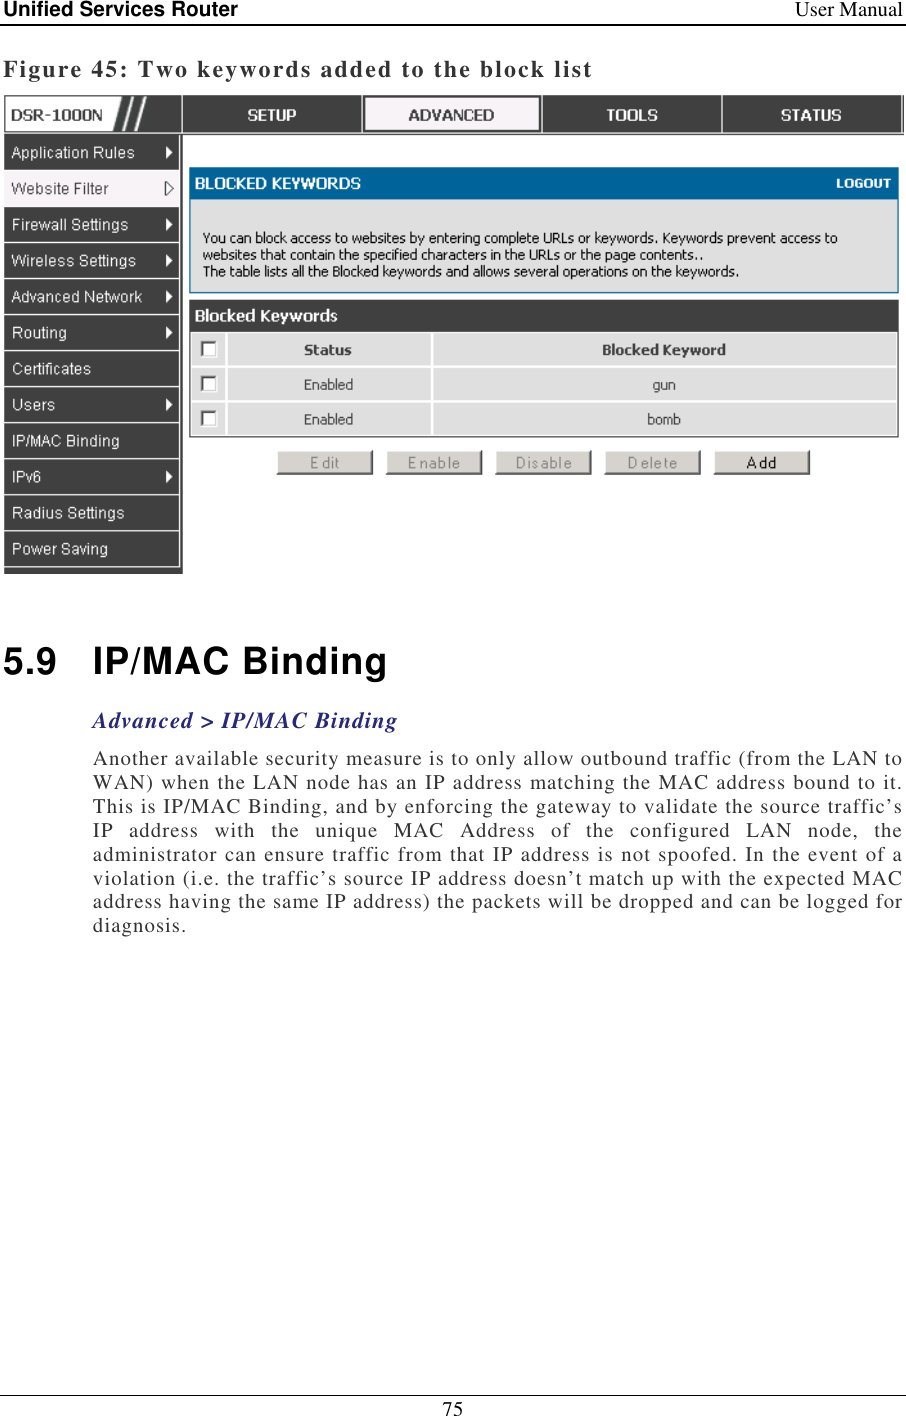 Unified Services Router    User Manual 75  Figure 45: Two keywords added to the block list   5.9  IP/MAC Binding Advanced &gt; IP/MAC Binding Another available security measure is to only allow outbound traffic (from the LAN to WAN) when the LAN node has an IP address matching the MAC address bound to it. This is IP/MAC Binding, and by enforcing the gateway to validate the source traffic’s IP  address  with  the  unique  MAC  Address  of  the  configured  LAN  node,  the administrator can ensure traffic from that IP address is not spoofed. In the event of a violation (i.e. the traffic’s source IP address doesn’t match up with the expected MAC address having the same IP address) the packets will be dropped and can be logged for diagnosis.  